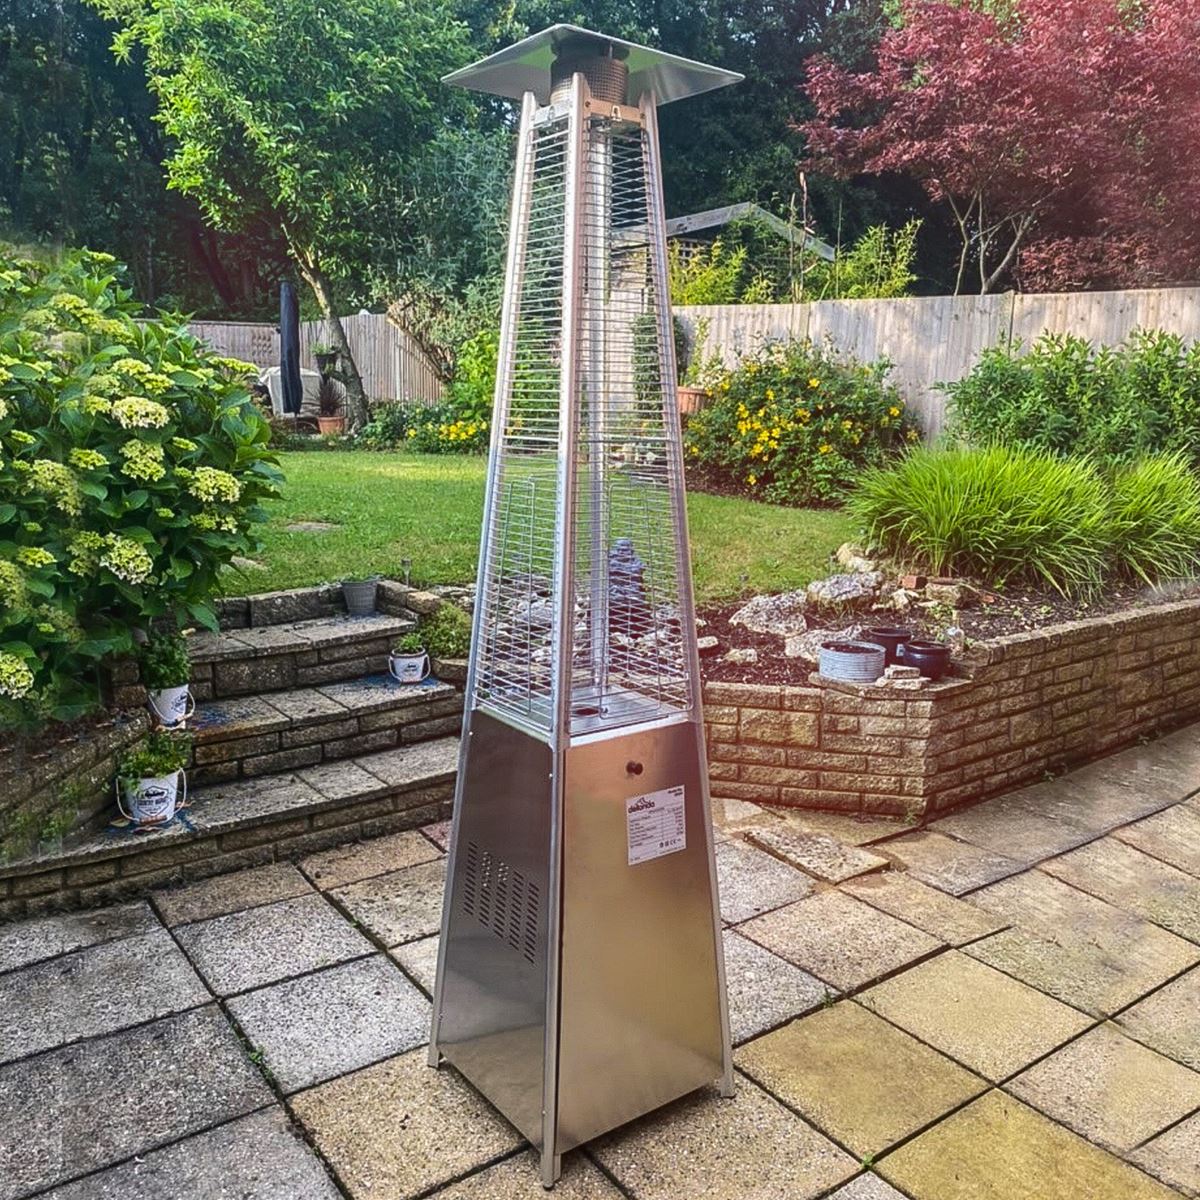 Dellonda 13kW Pyramid Gas Patio Heater 13kW Commercial/Garden Use - Stainless Steel